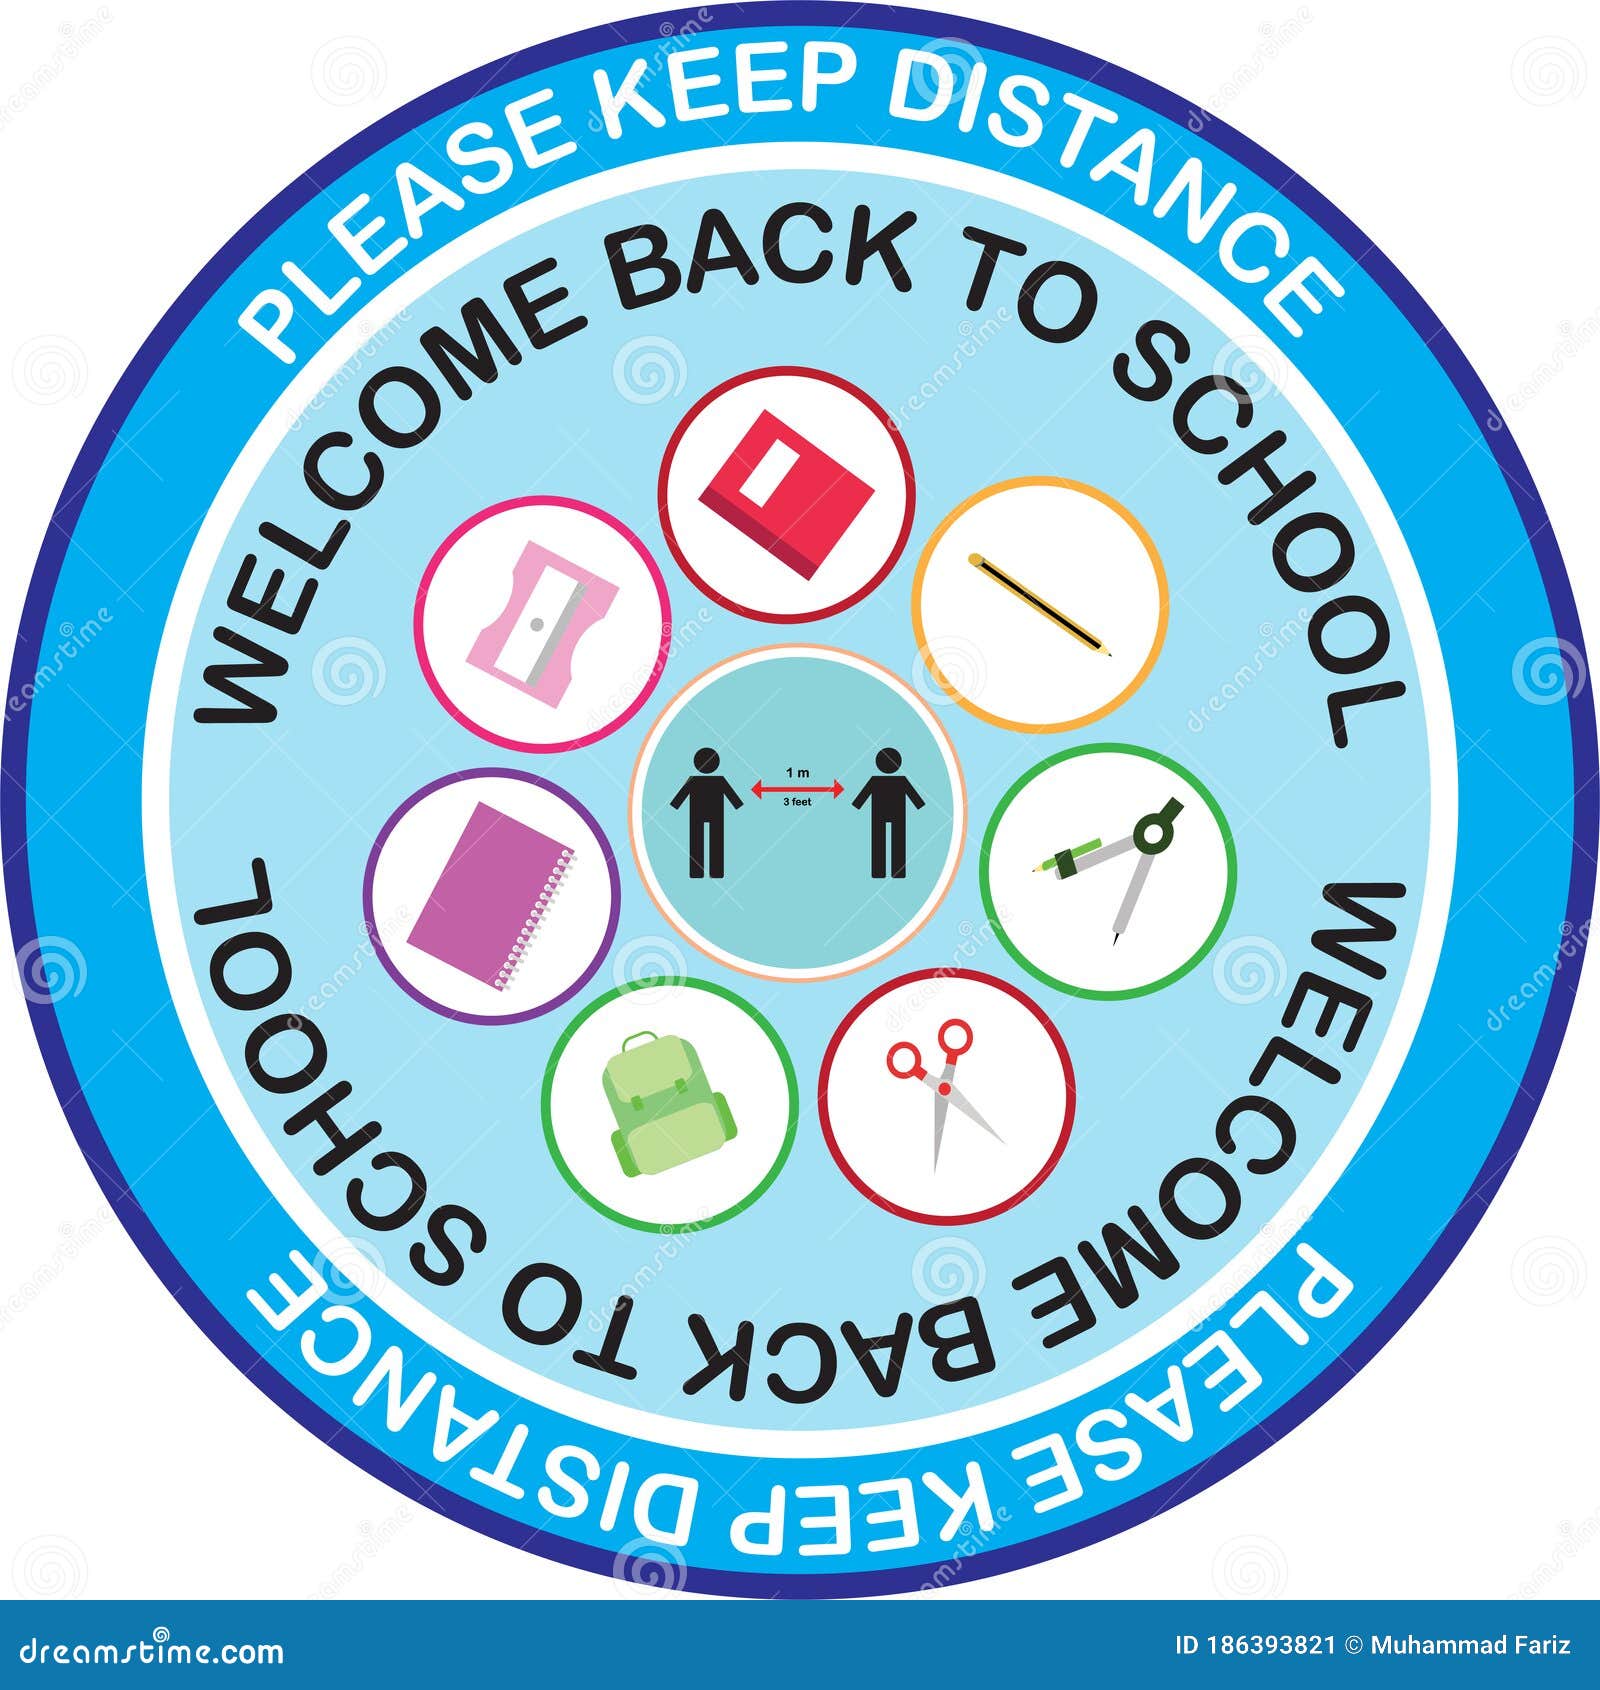 Welcome Back To School Keep Your Distance Round Vector Illustration Sign For Post Covid 19 Coronavirus Pandemic Covid19 Stock Vector Illustration Of Reopen Normal